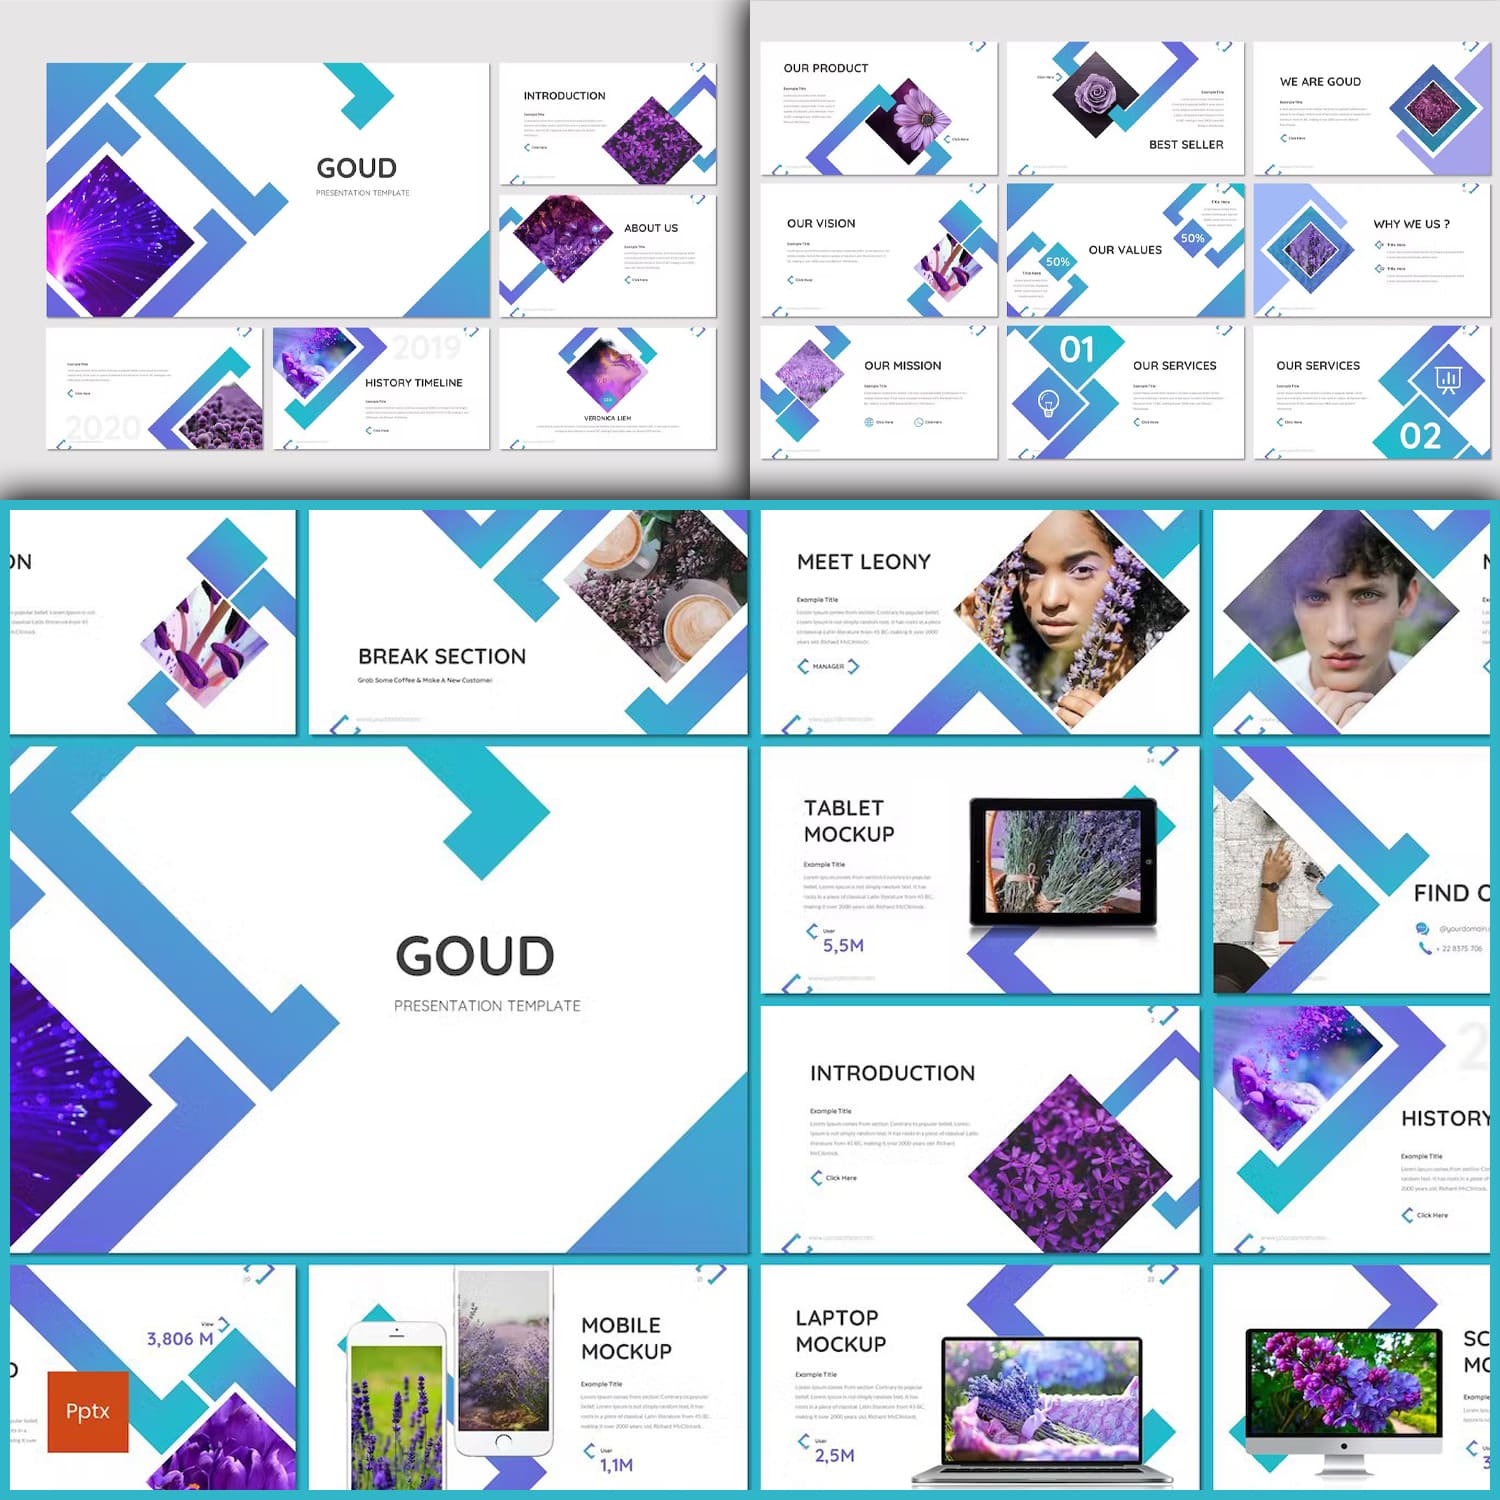 Goud Presentation Template created by inspirasign.